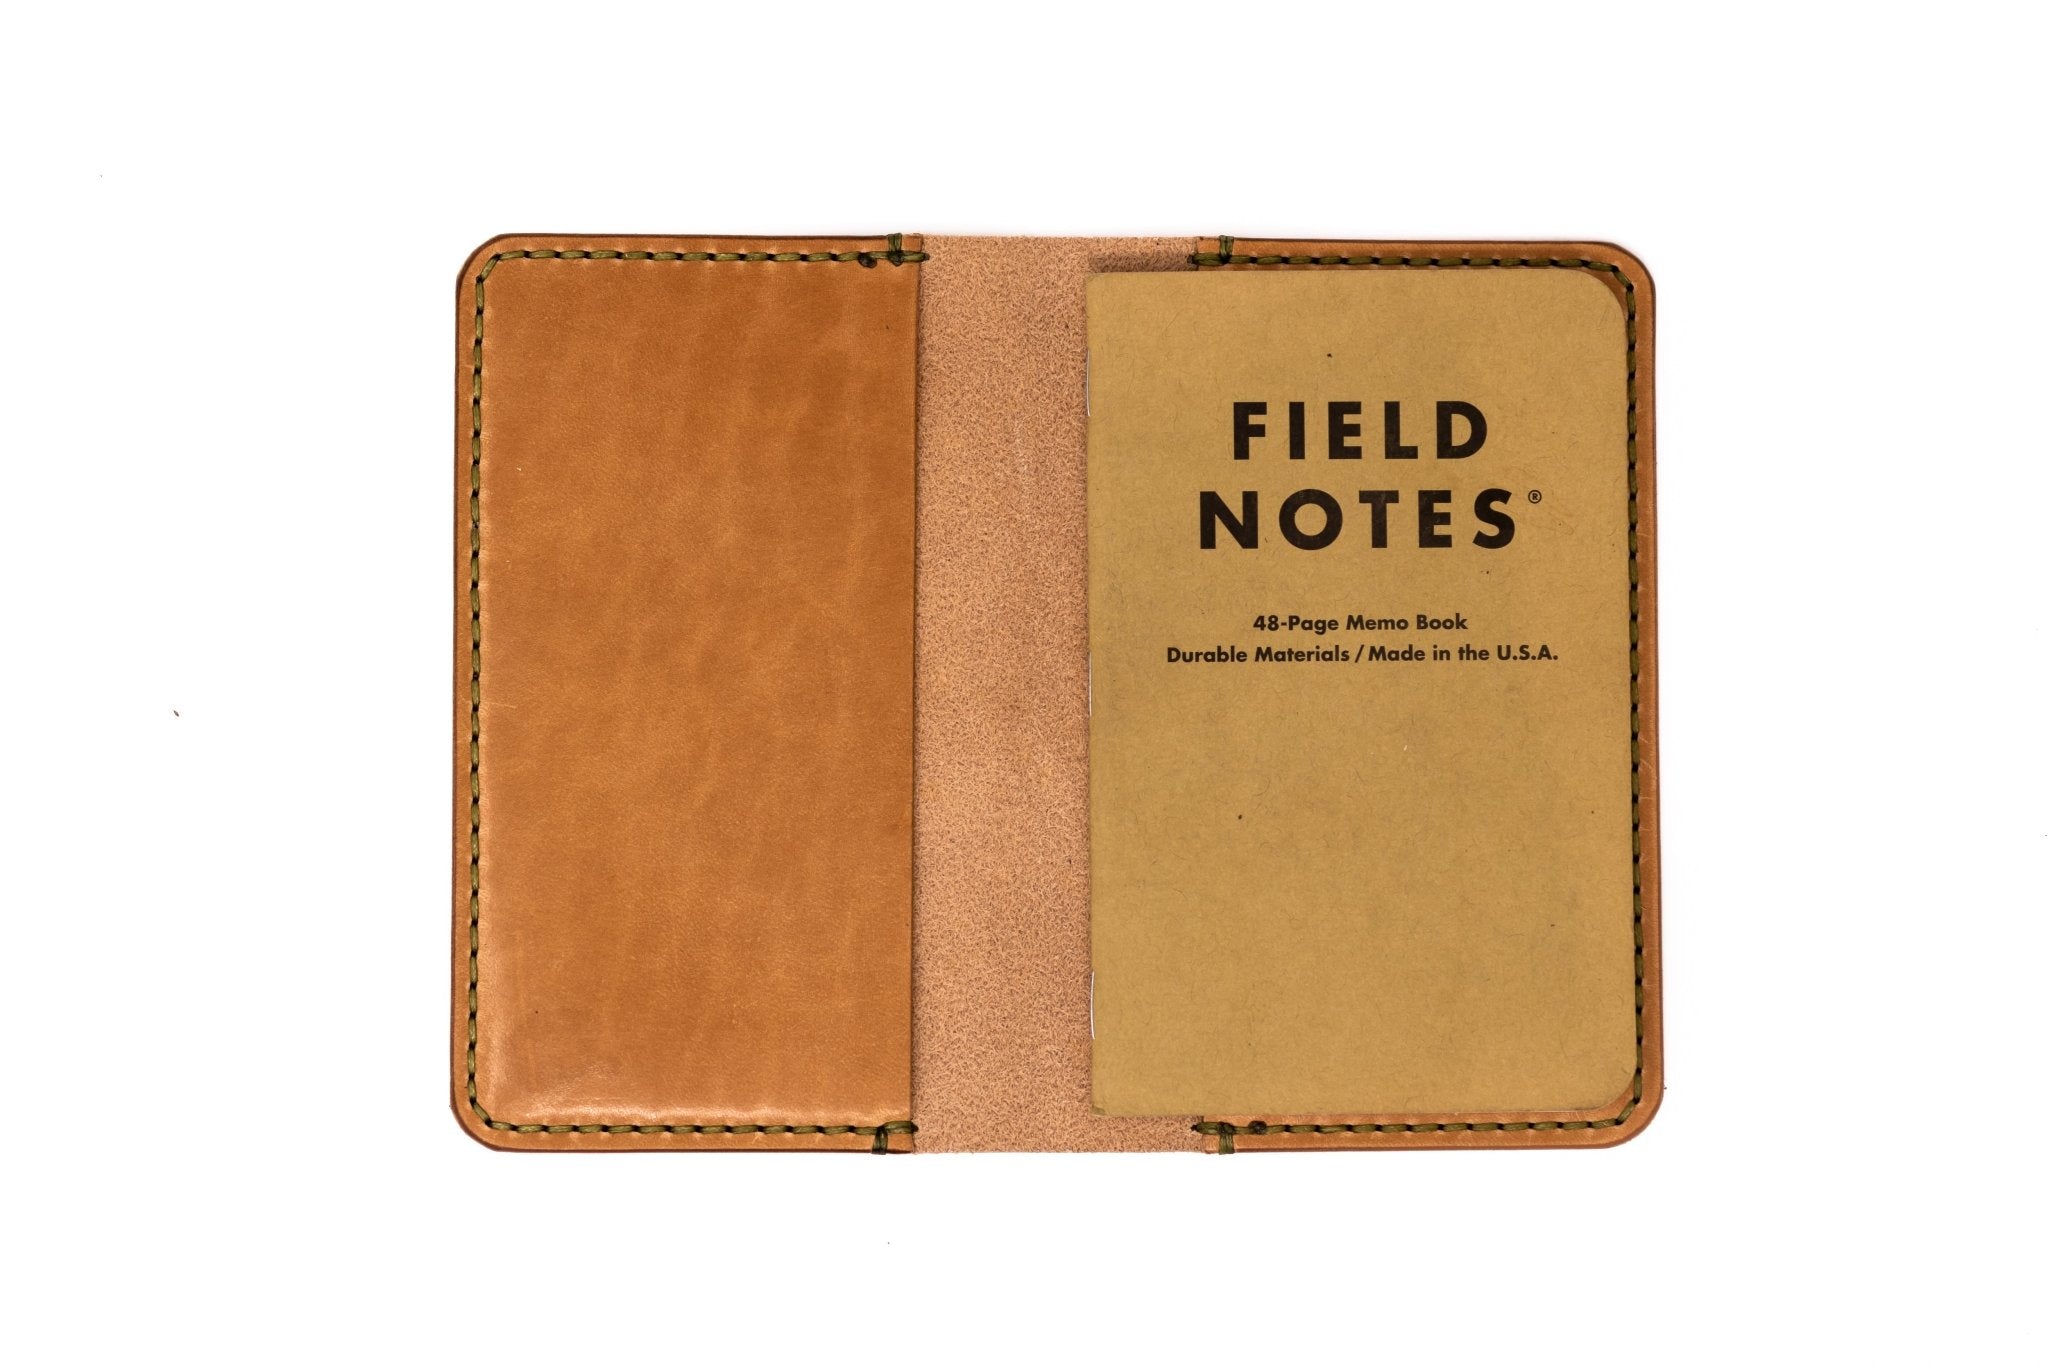 Notebook/Passport Cover - Lost Dutchman Leather handmade leather wallets